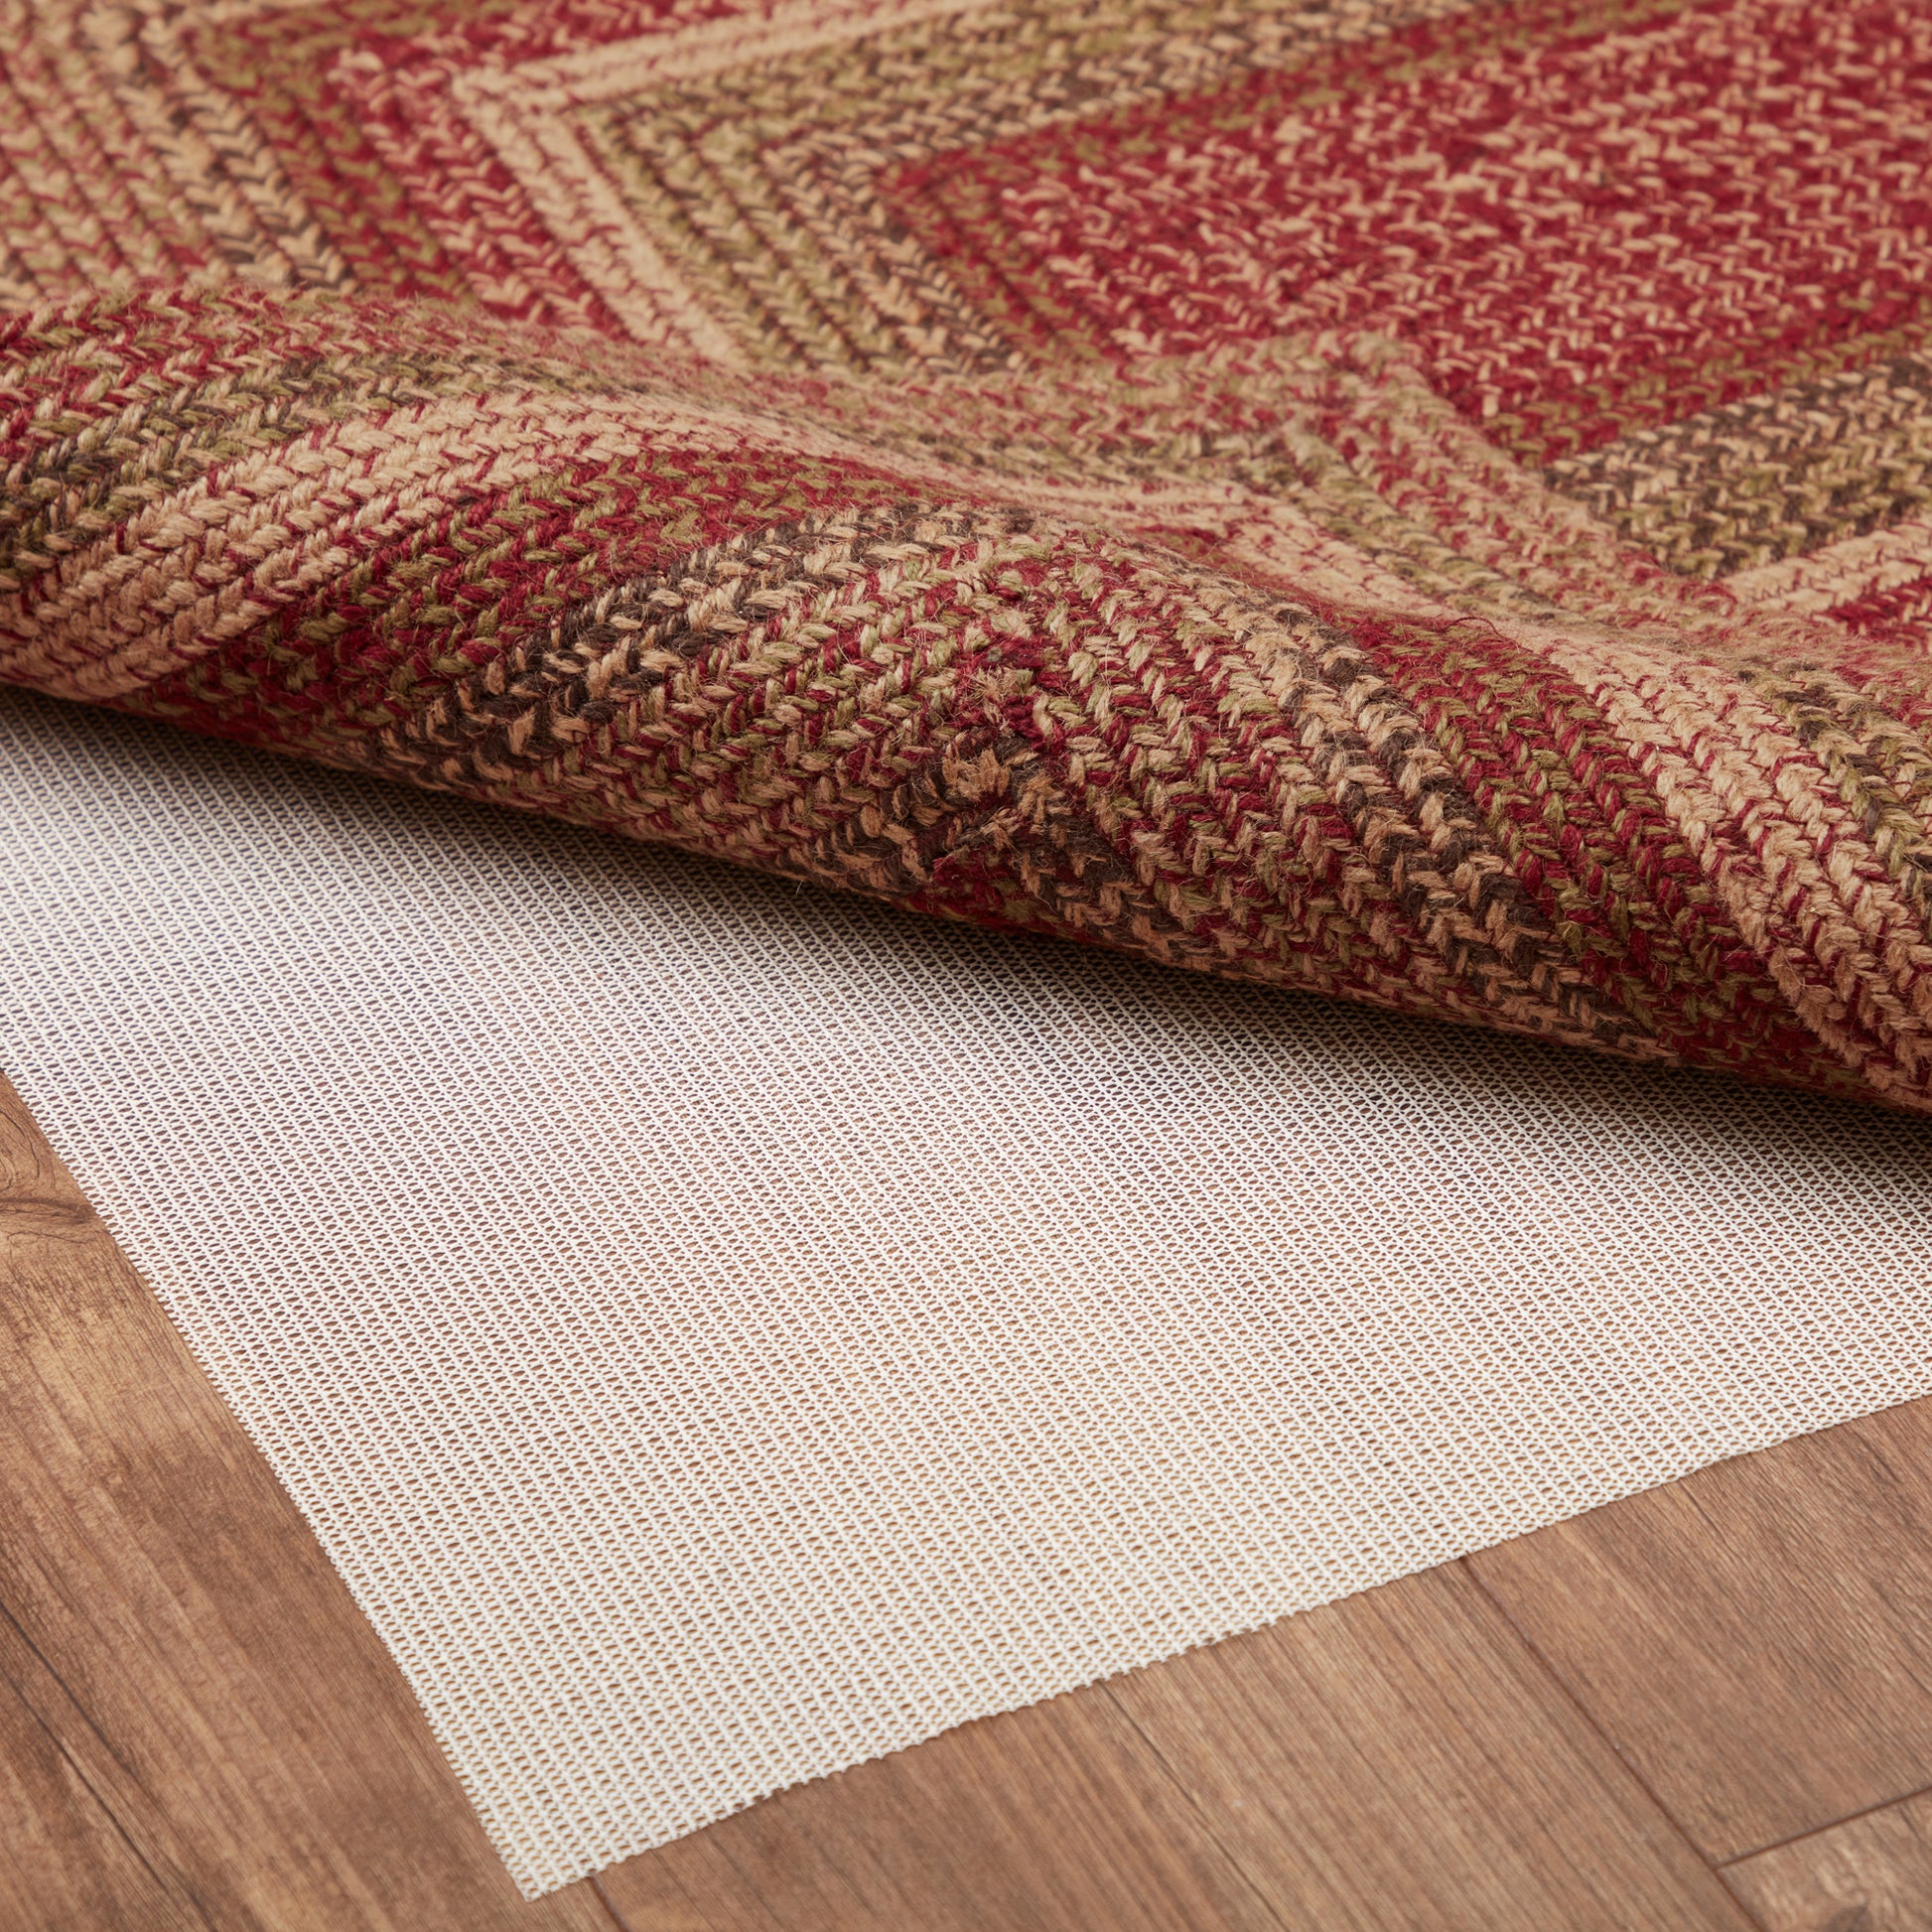 69462-Cider-Mill-Jute-Rug-Rect-w-Pad-36x60-image-7